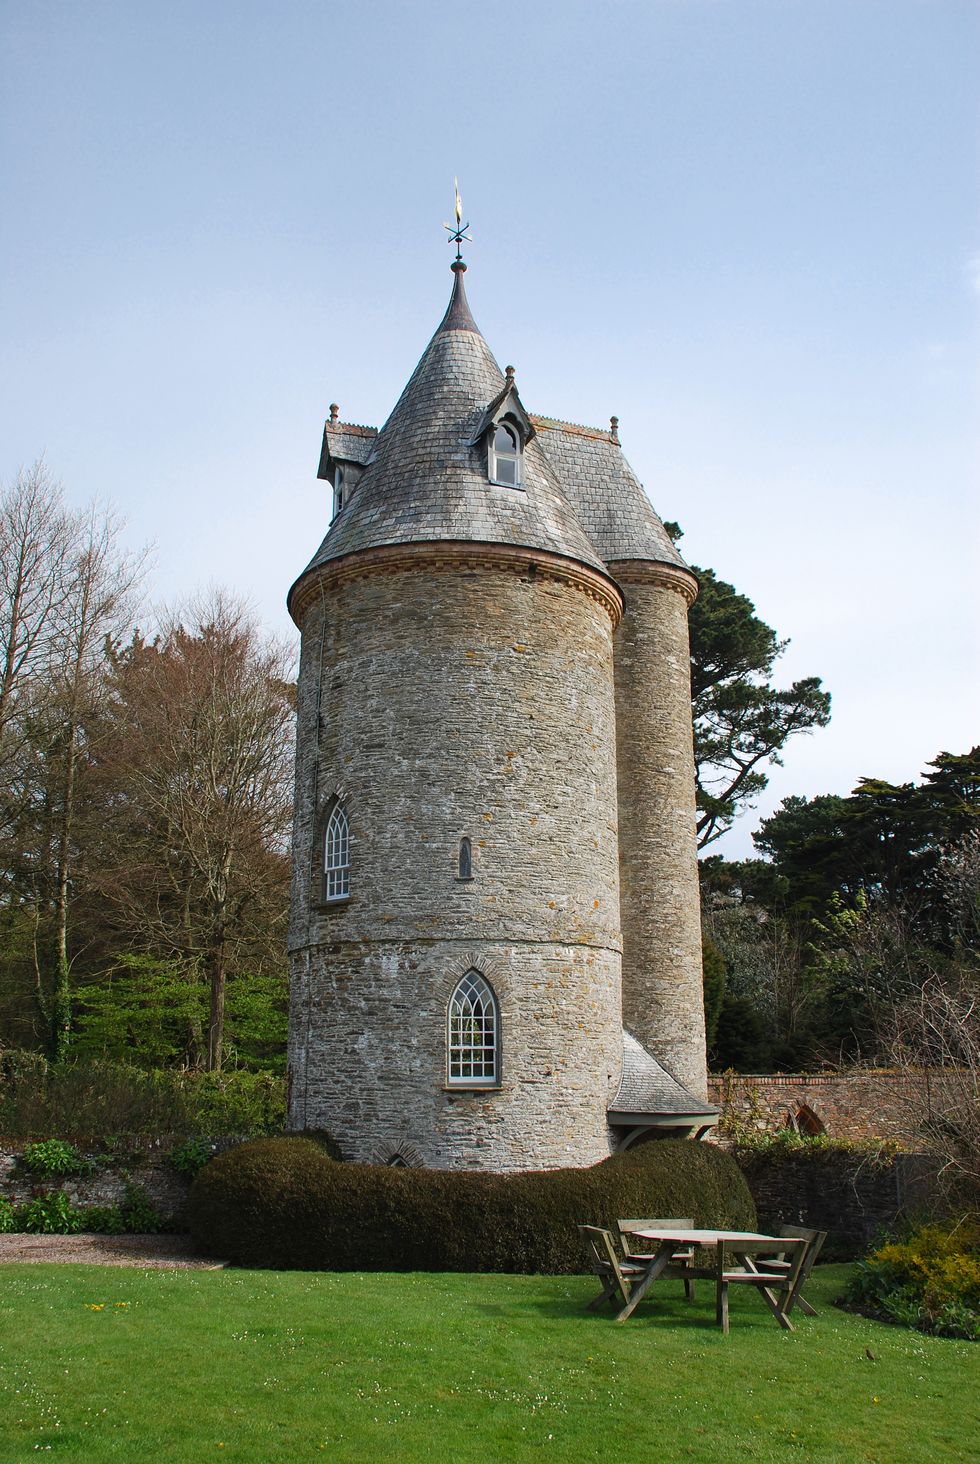 The Water Tower, exterior portrait - ©National Trust Images, Mike Henton